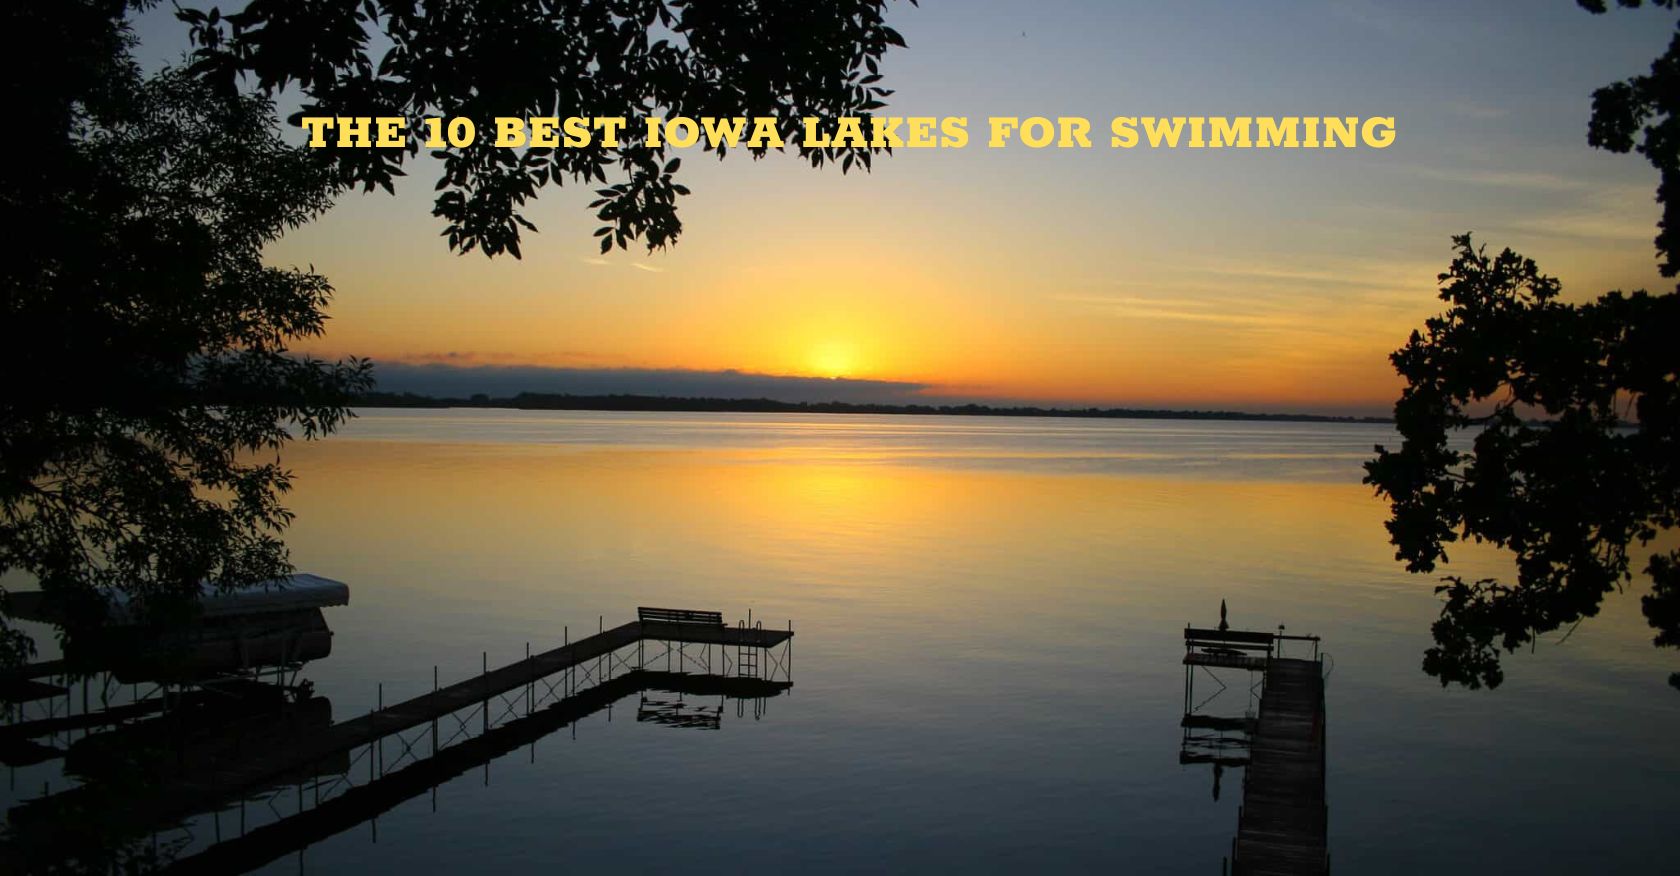 THE 10 BEST IOWA LAKES FOR SWIMMING